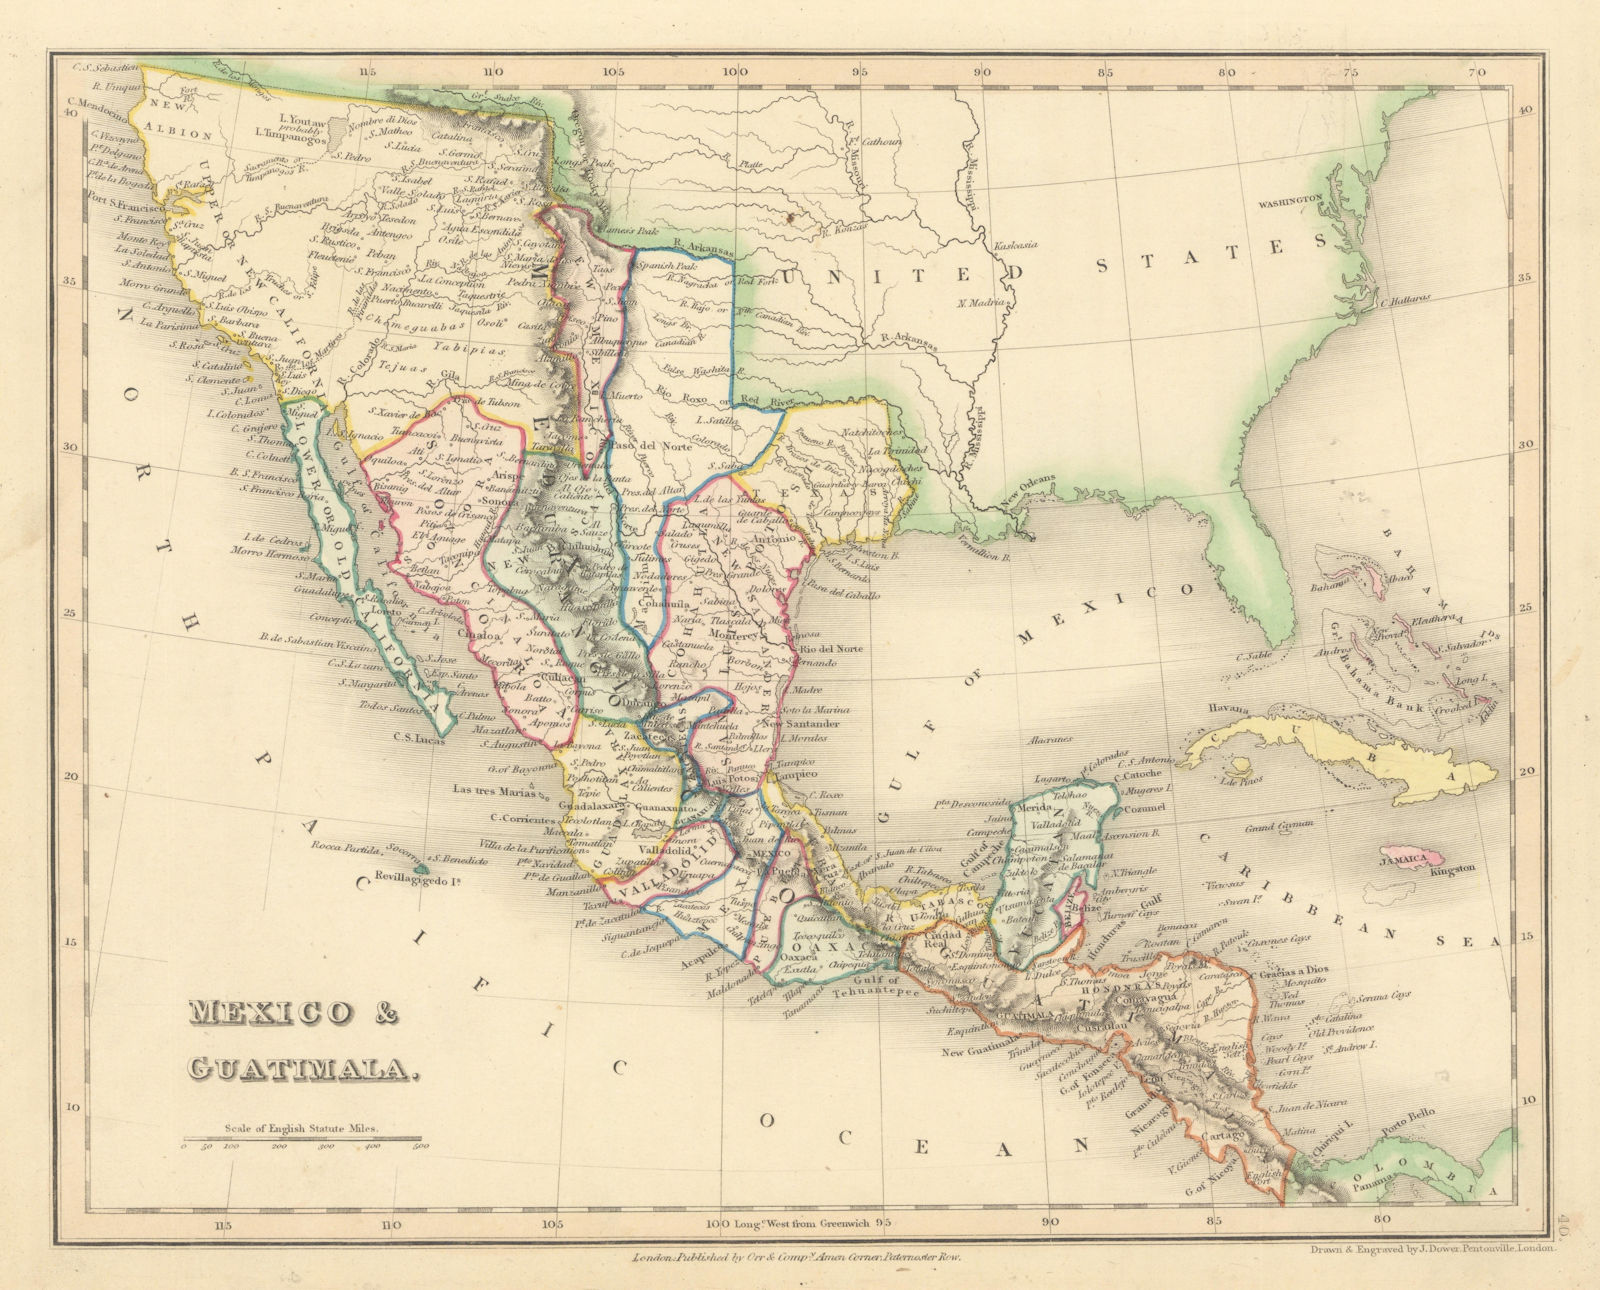 Associate Product Mexico & Guatimala by John Dower. Mexico includes California & Texas 1845 map